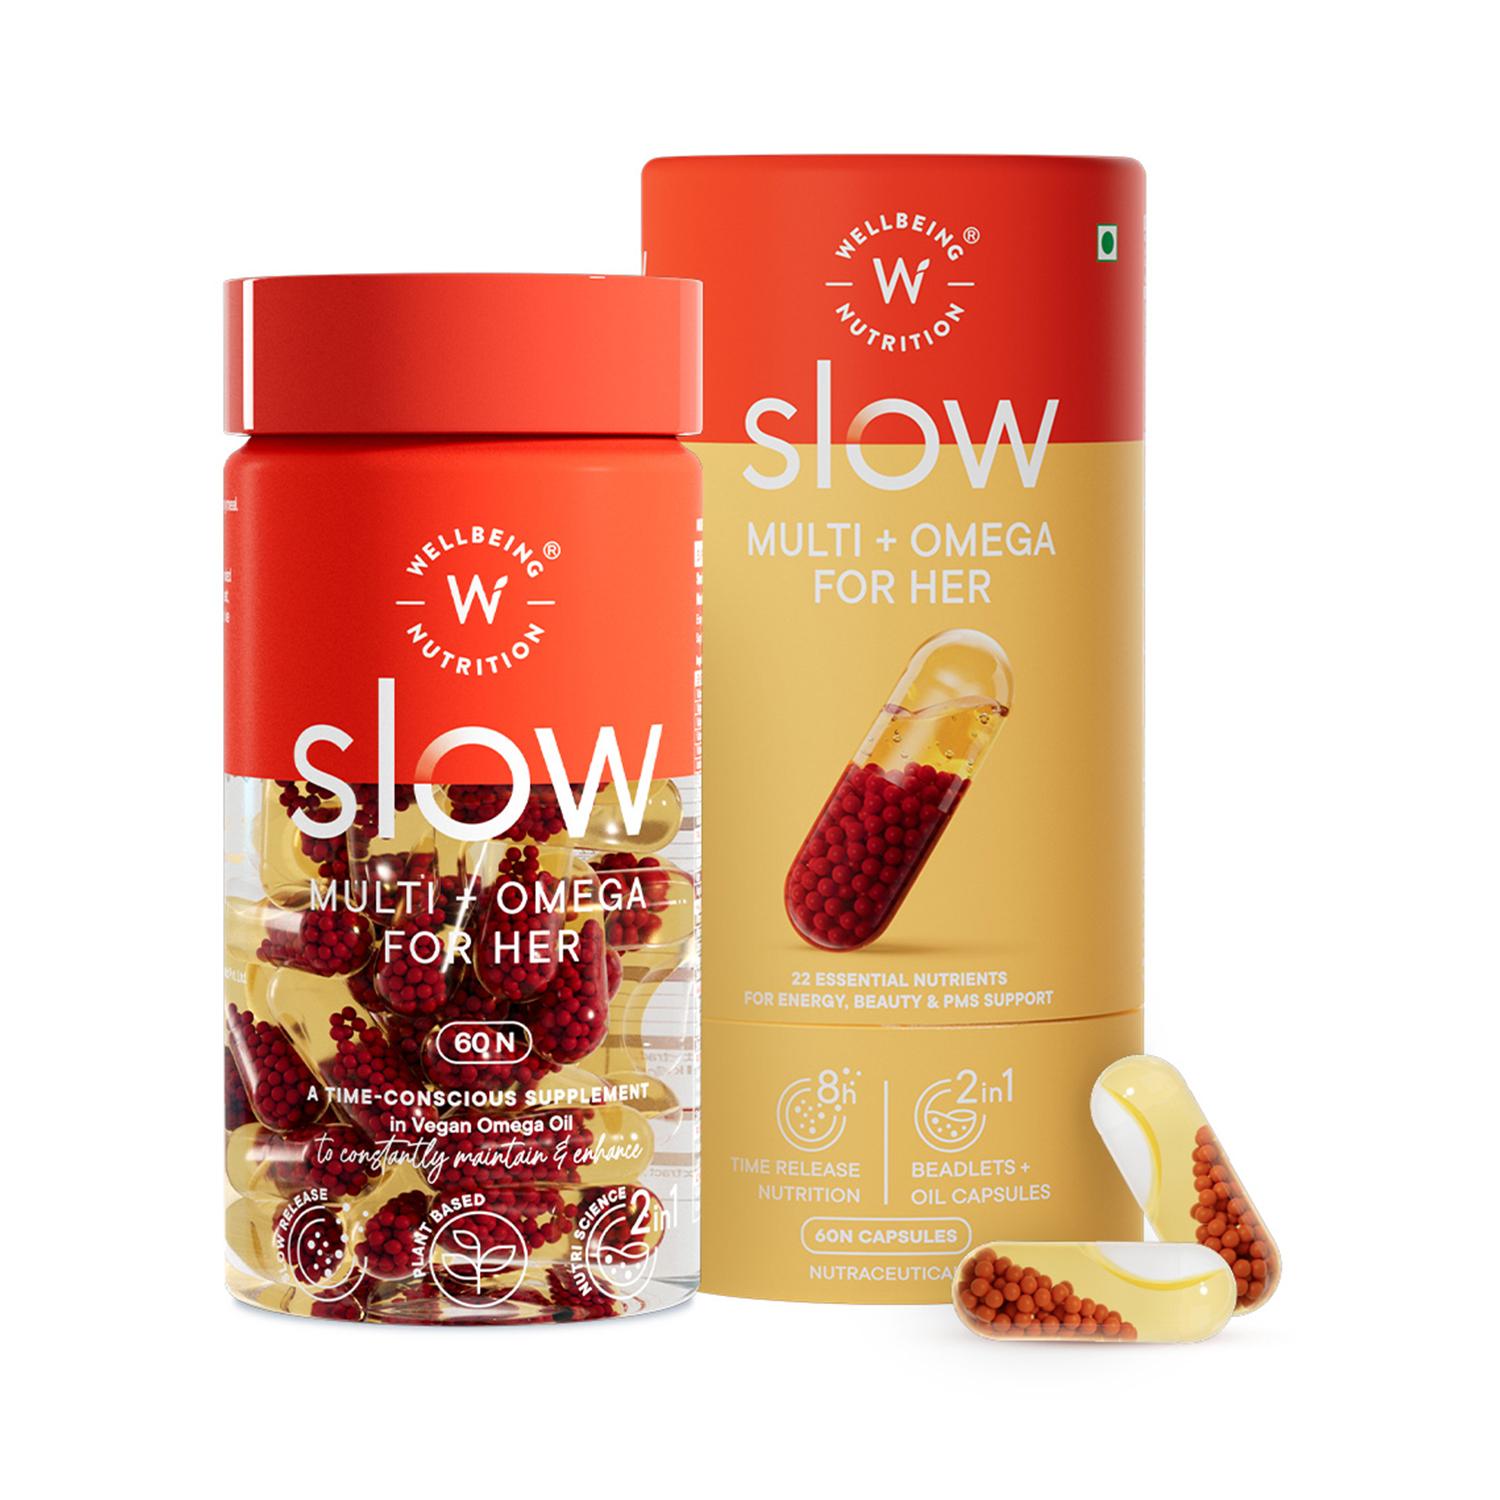 Wellbeing Nutrition | Wellbeing Nutrition Slow - Multivitamin for Her 22 Essential Vitamins & Minerals in MCT Oil